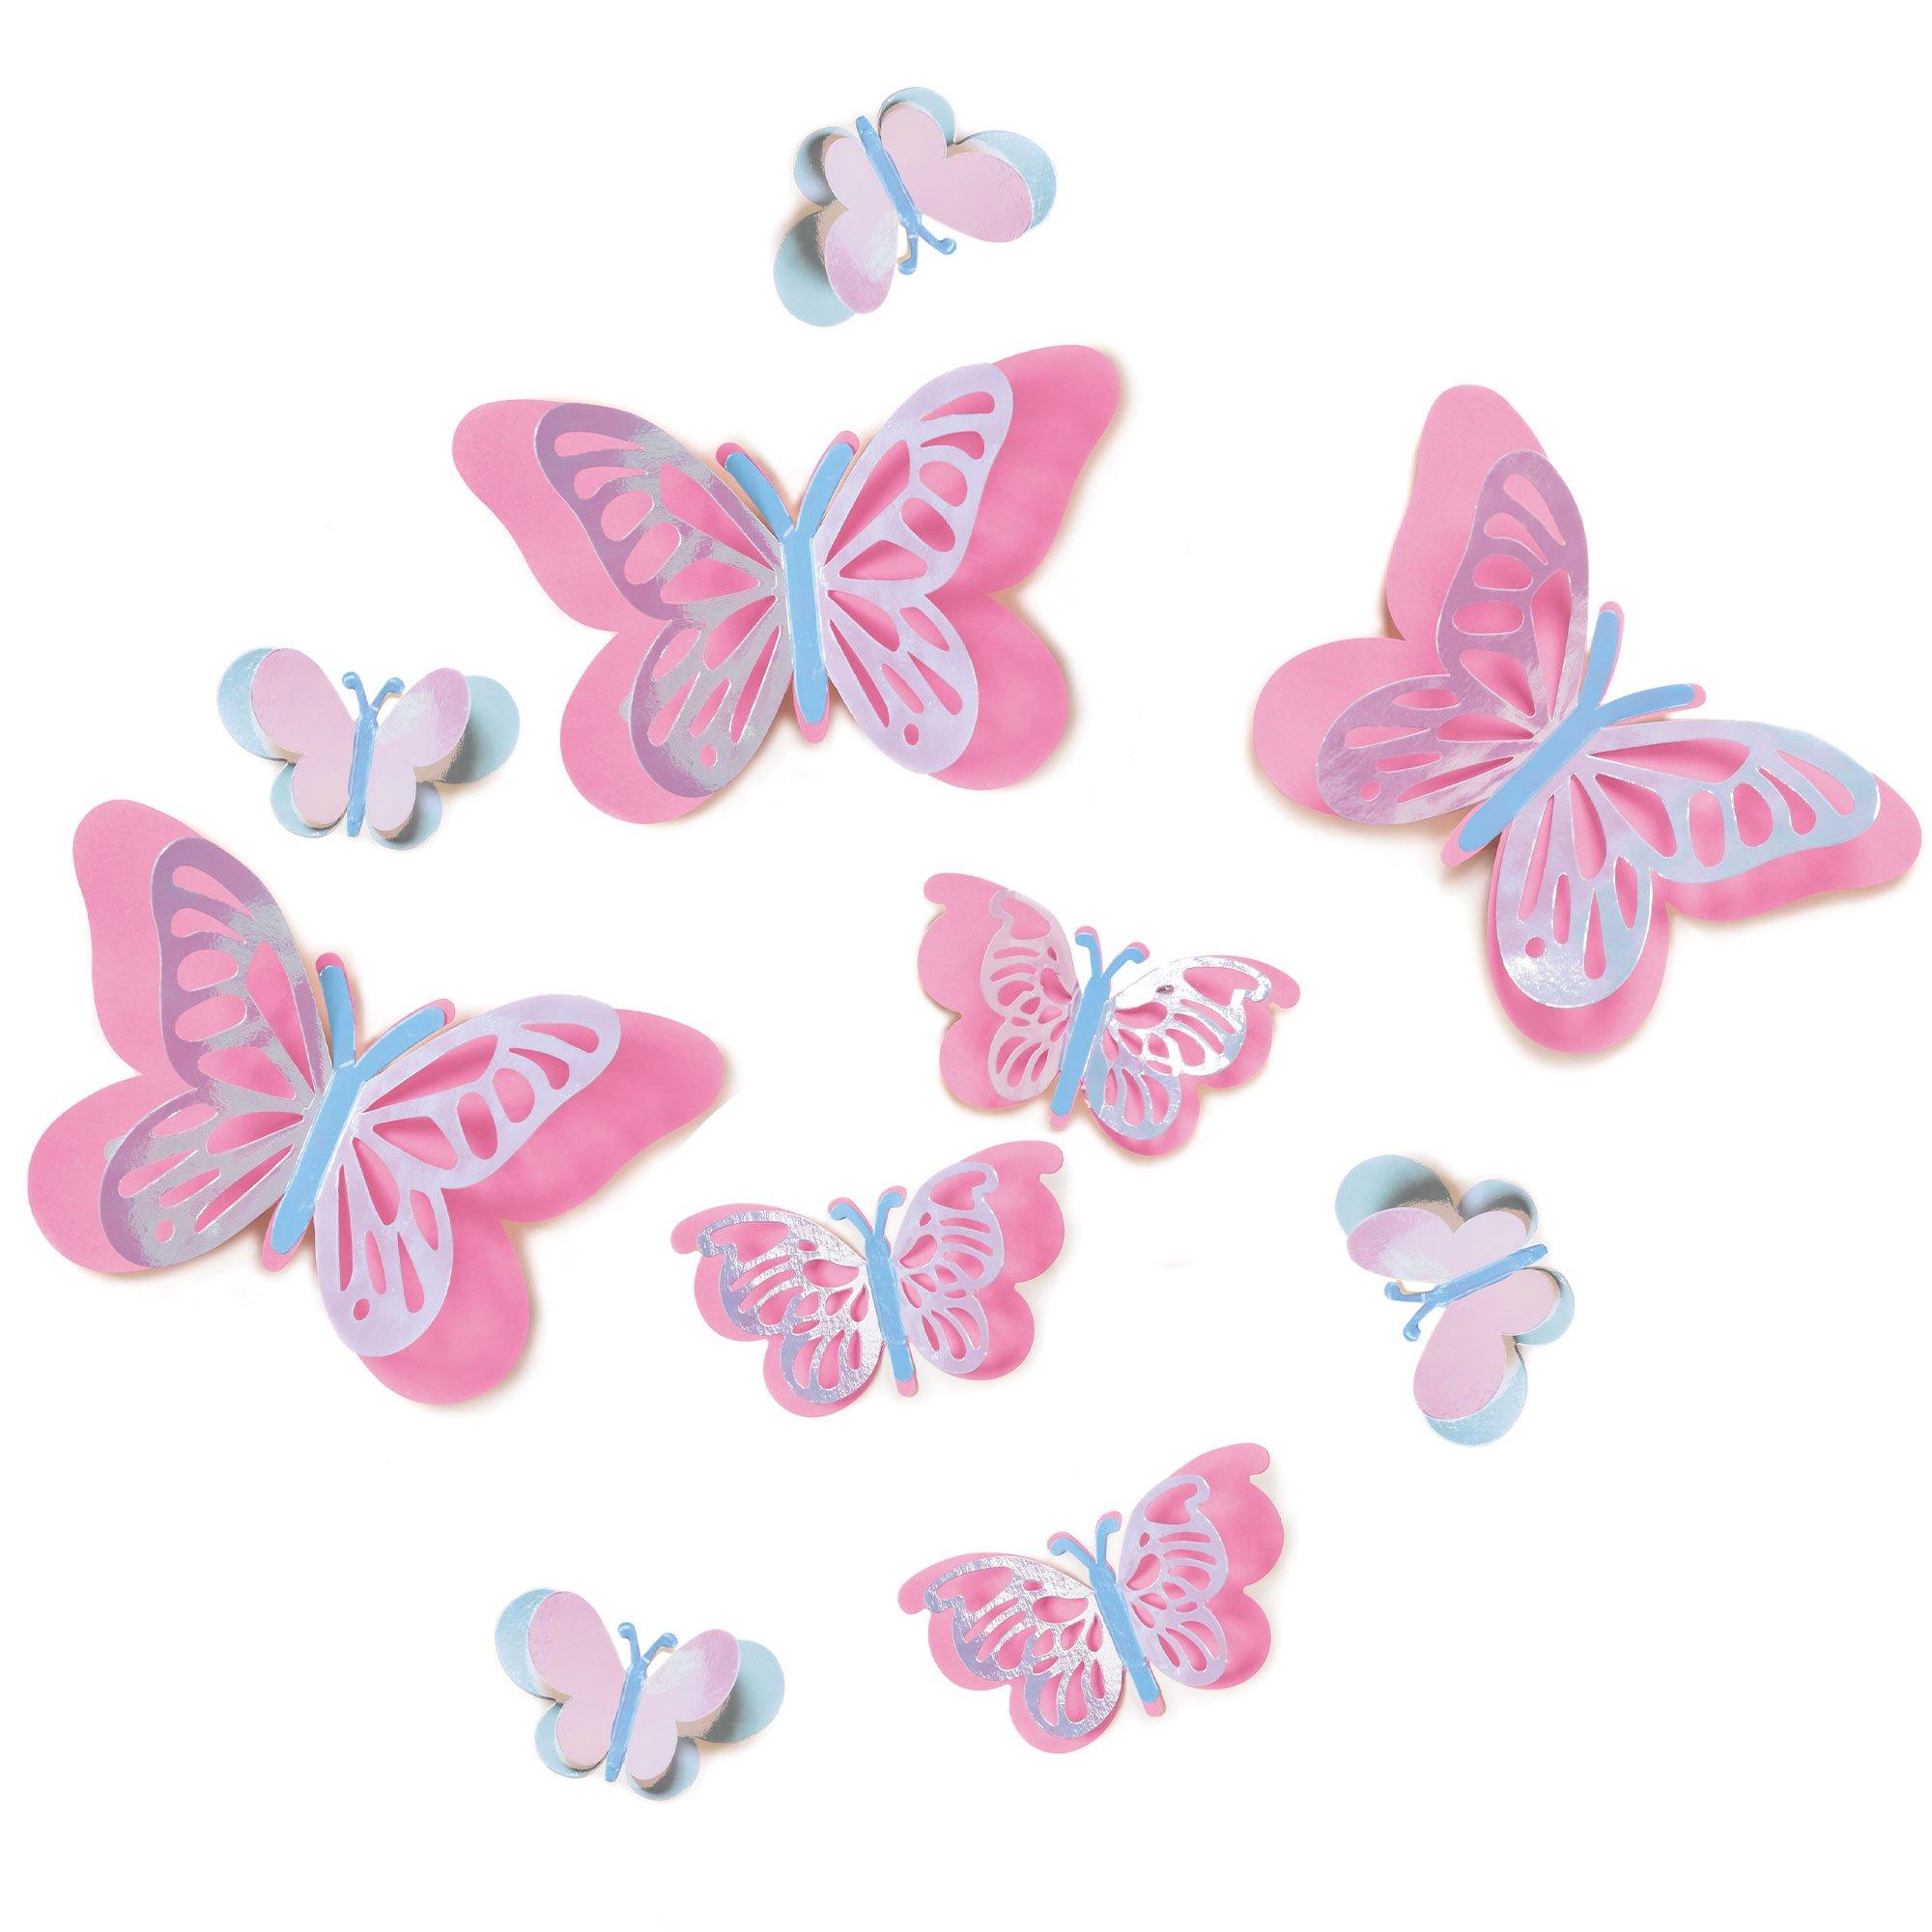 Iridescent Pink Butterfly Accent Décor Kit, 12pc